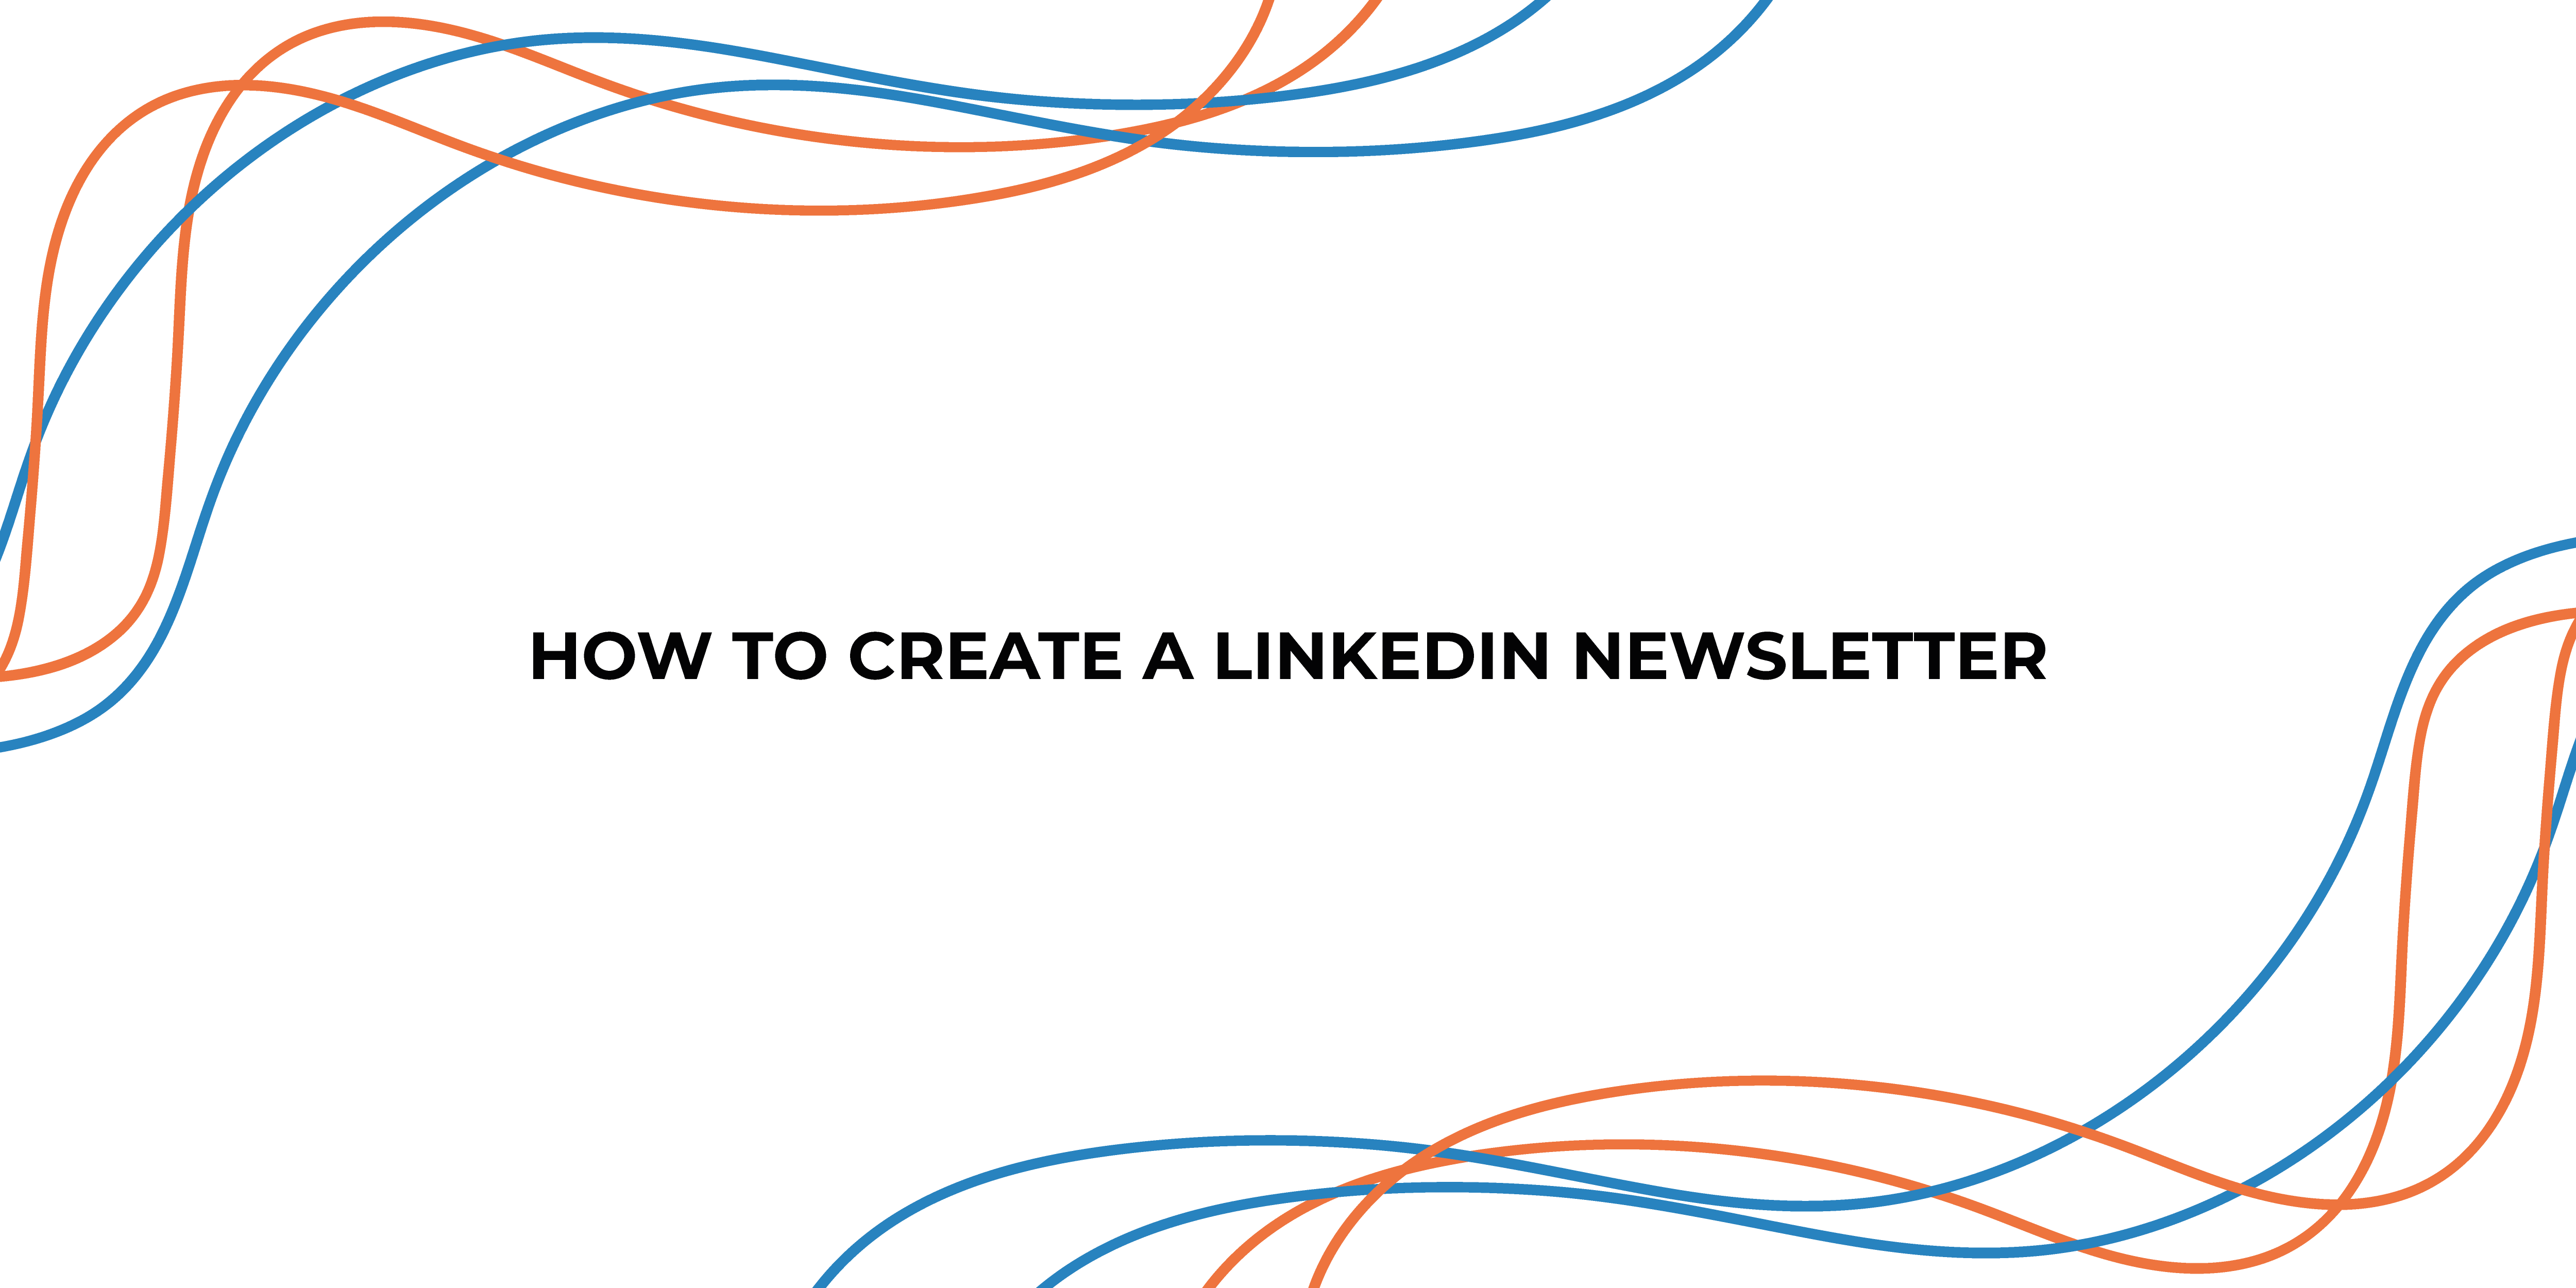 How To Create A LinkedIn Newsletter